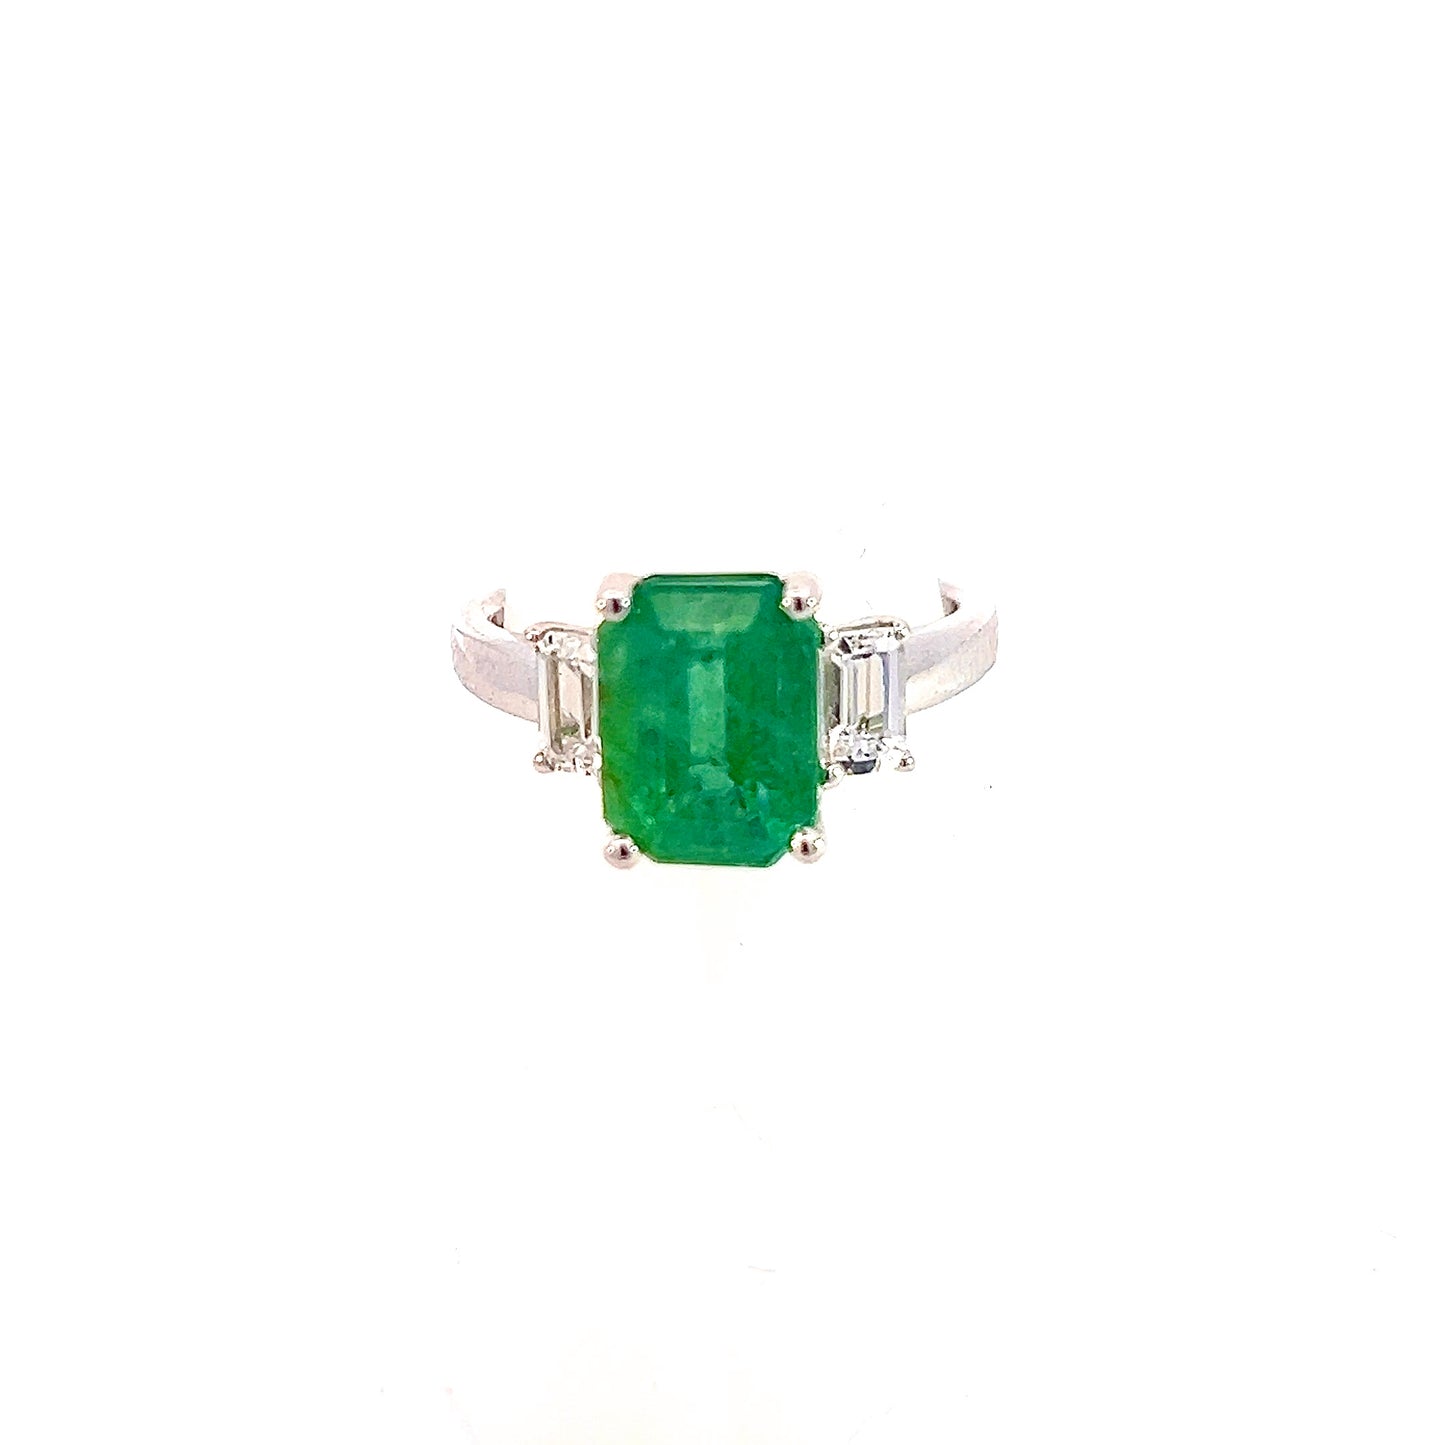 Natural Emerald Sapphire Ring 6.25 14k White Gold 3.49 TCW Certified $4,970 310641